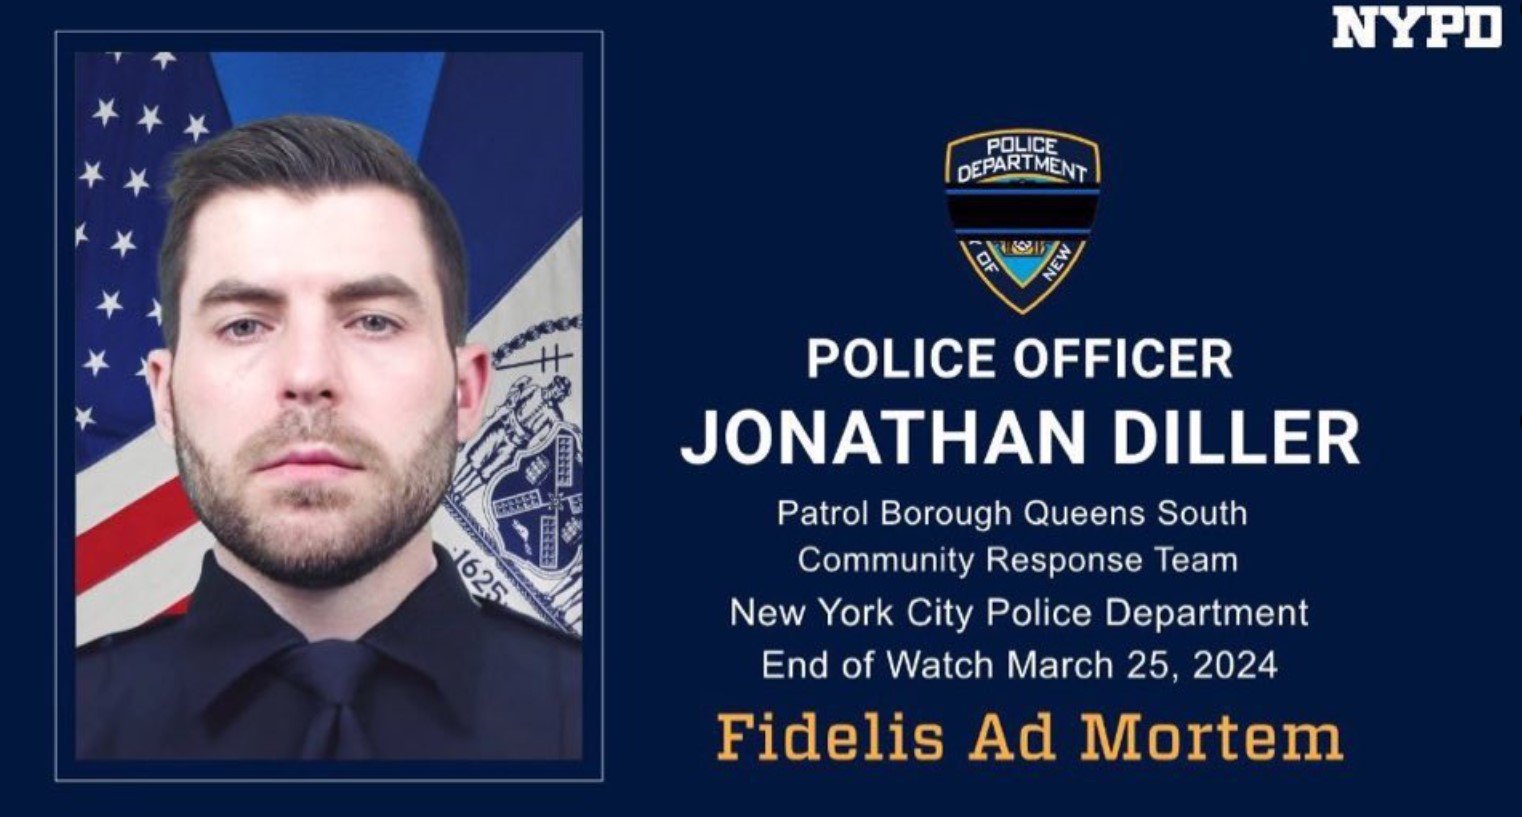 President Trump Will Attend NYPD Officer Diller's Wake on Thursday - Biden Will Attend Fundraiser in NYC Instead | The Gateway Pundit | by Jim Hoft